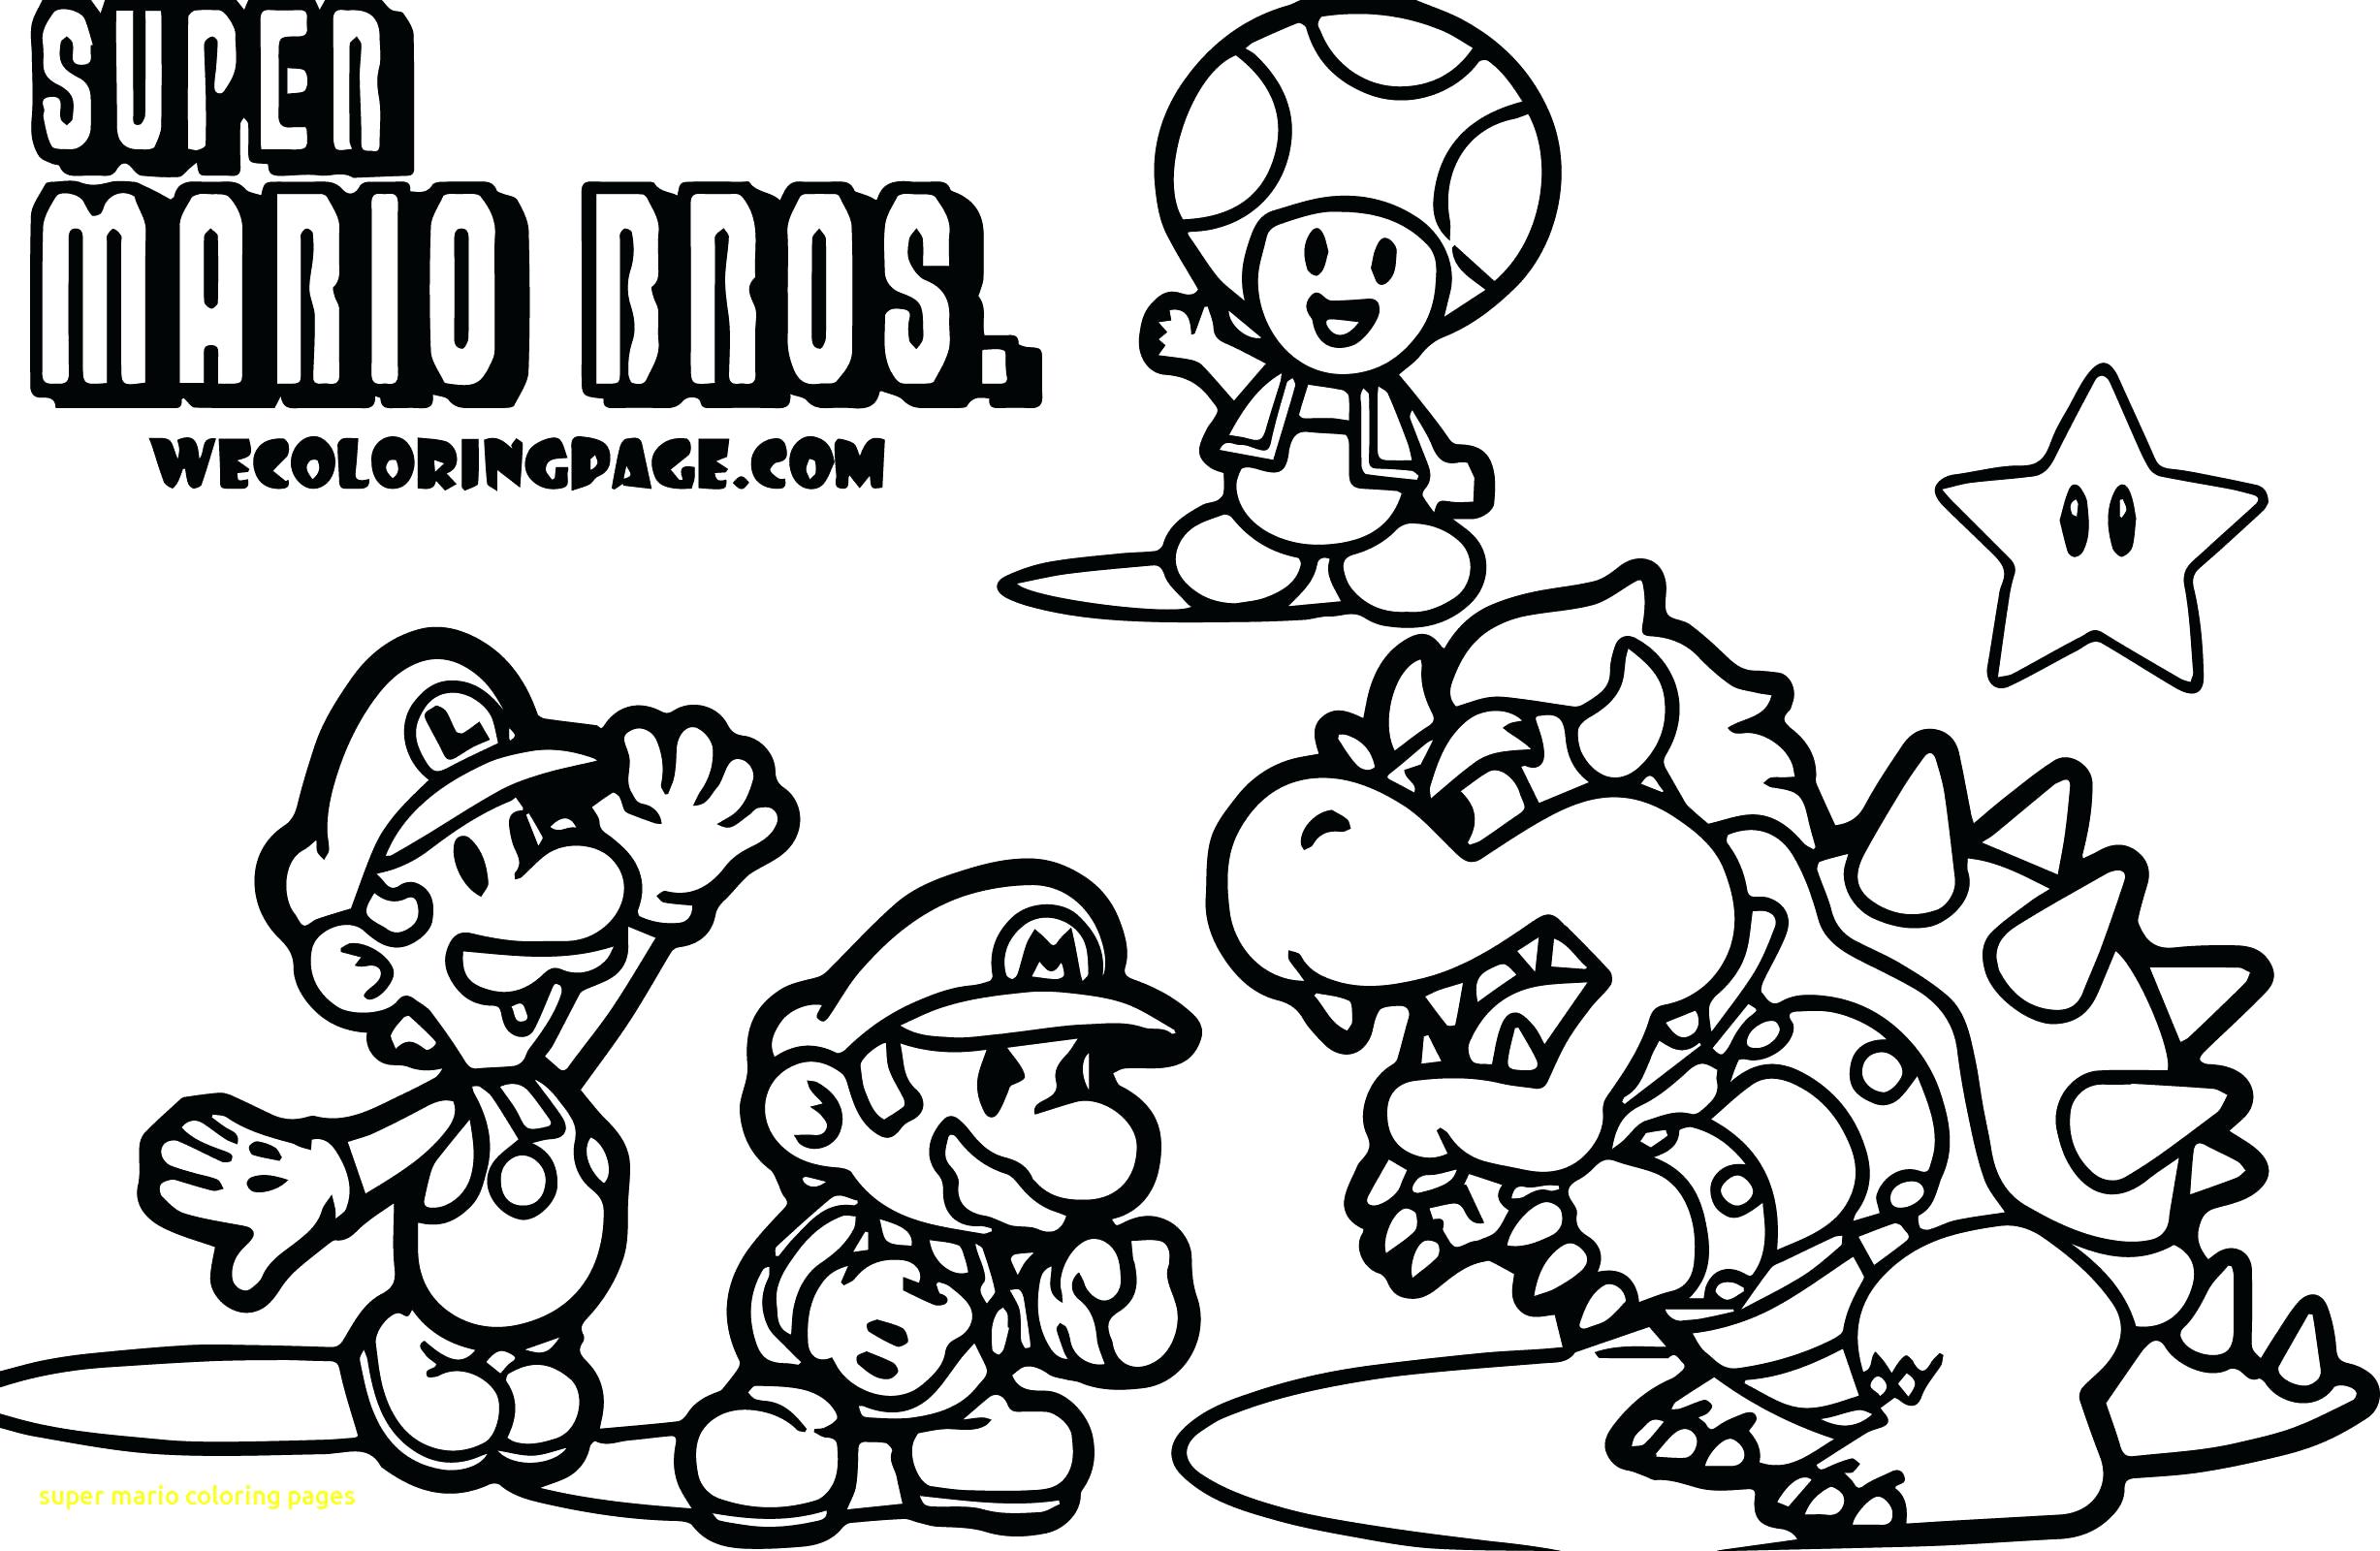 Super Mario 3d World Coloring Pages at GetColorings.com | Free